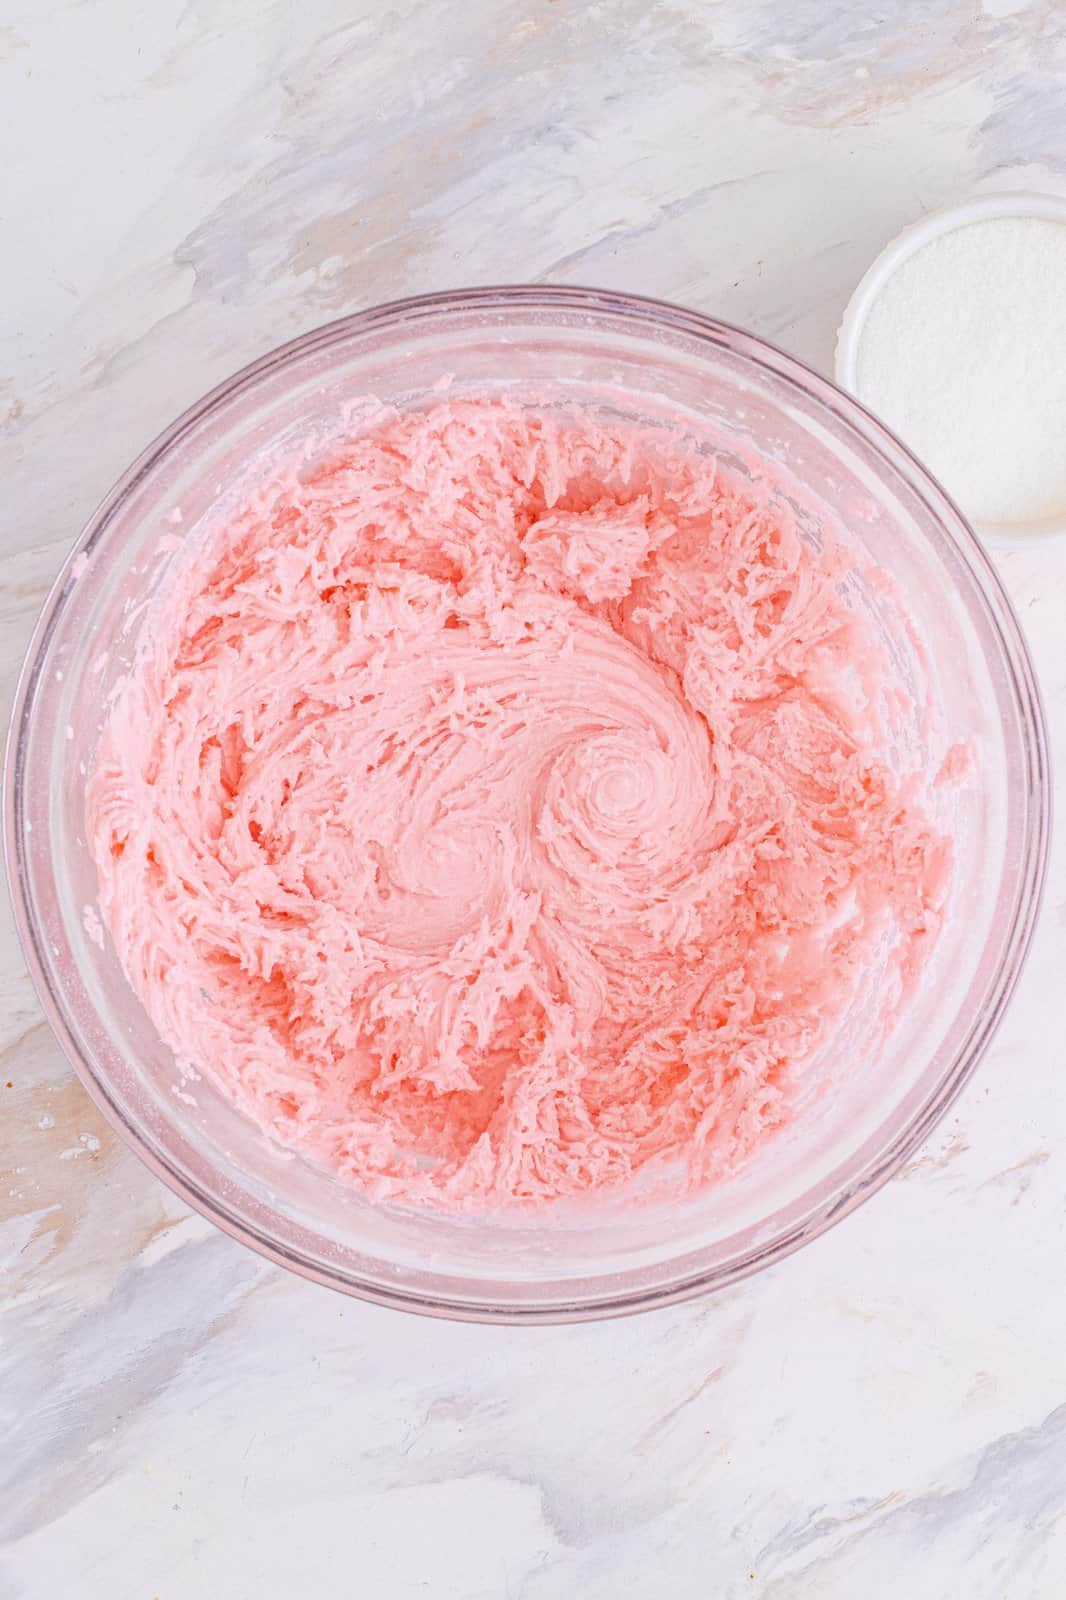 cream cheese and red food coloring mixed together in a clear bowl.